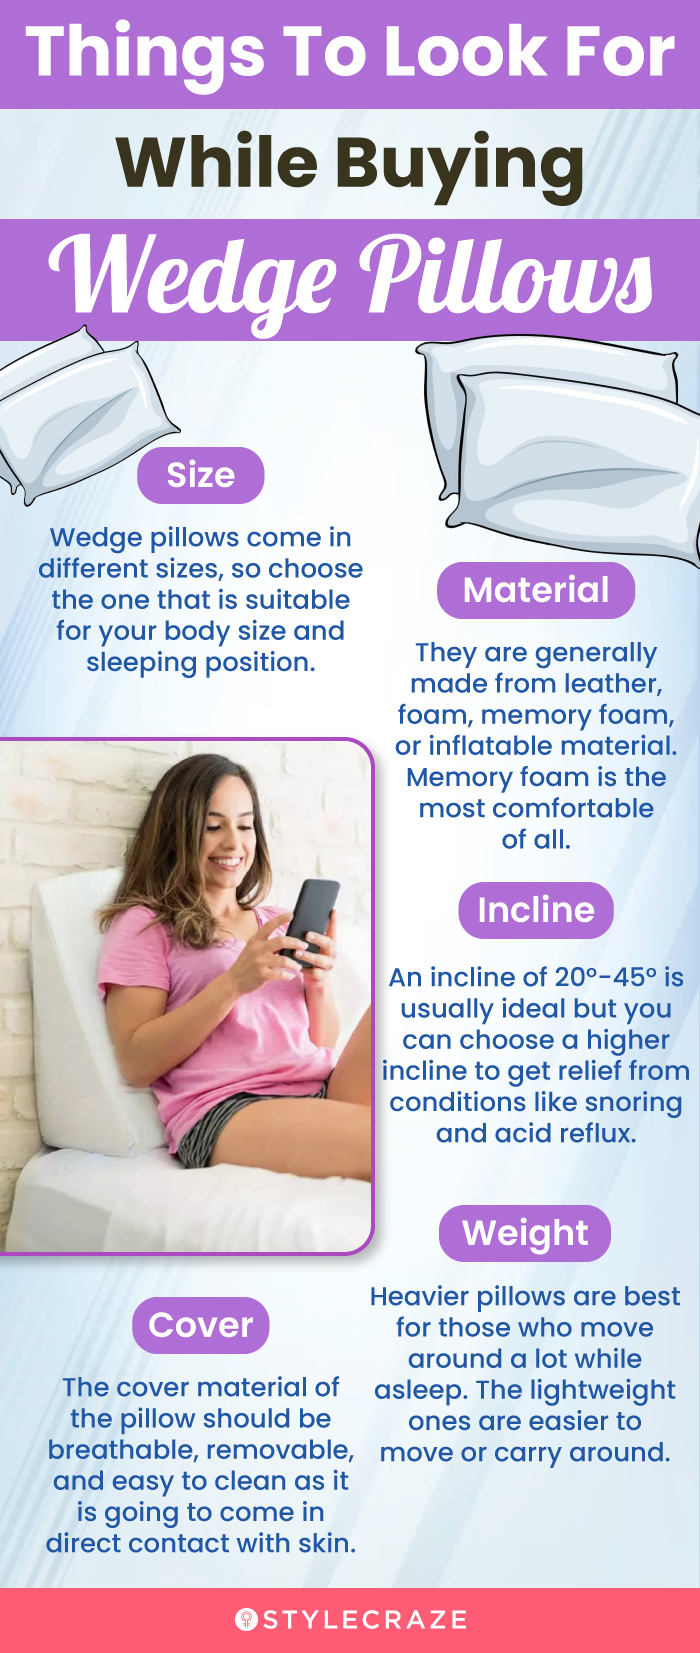 Things To Looks For While Buying Wedge Pillows (infographic)